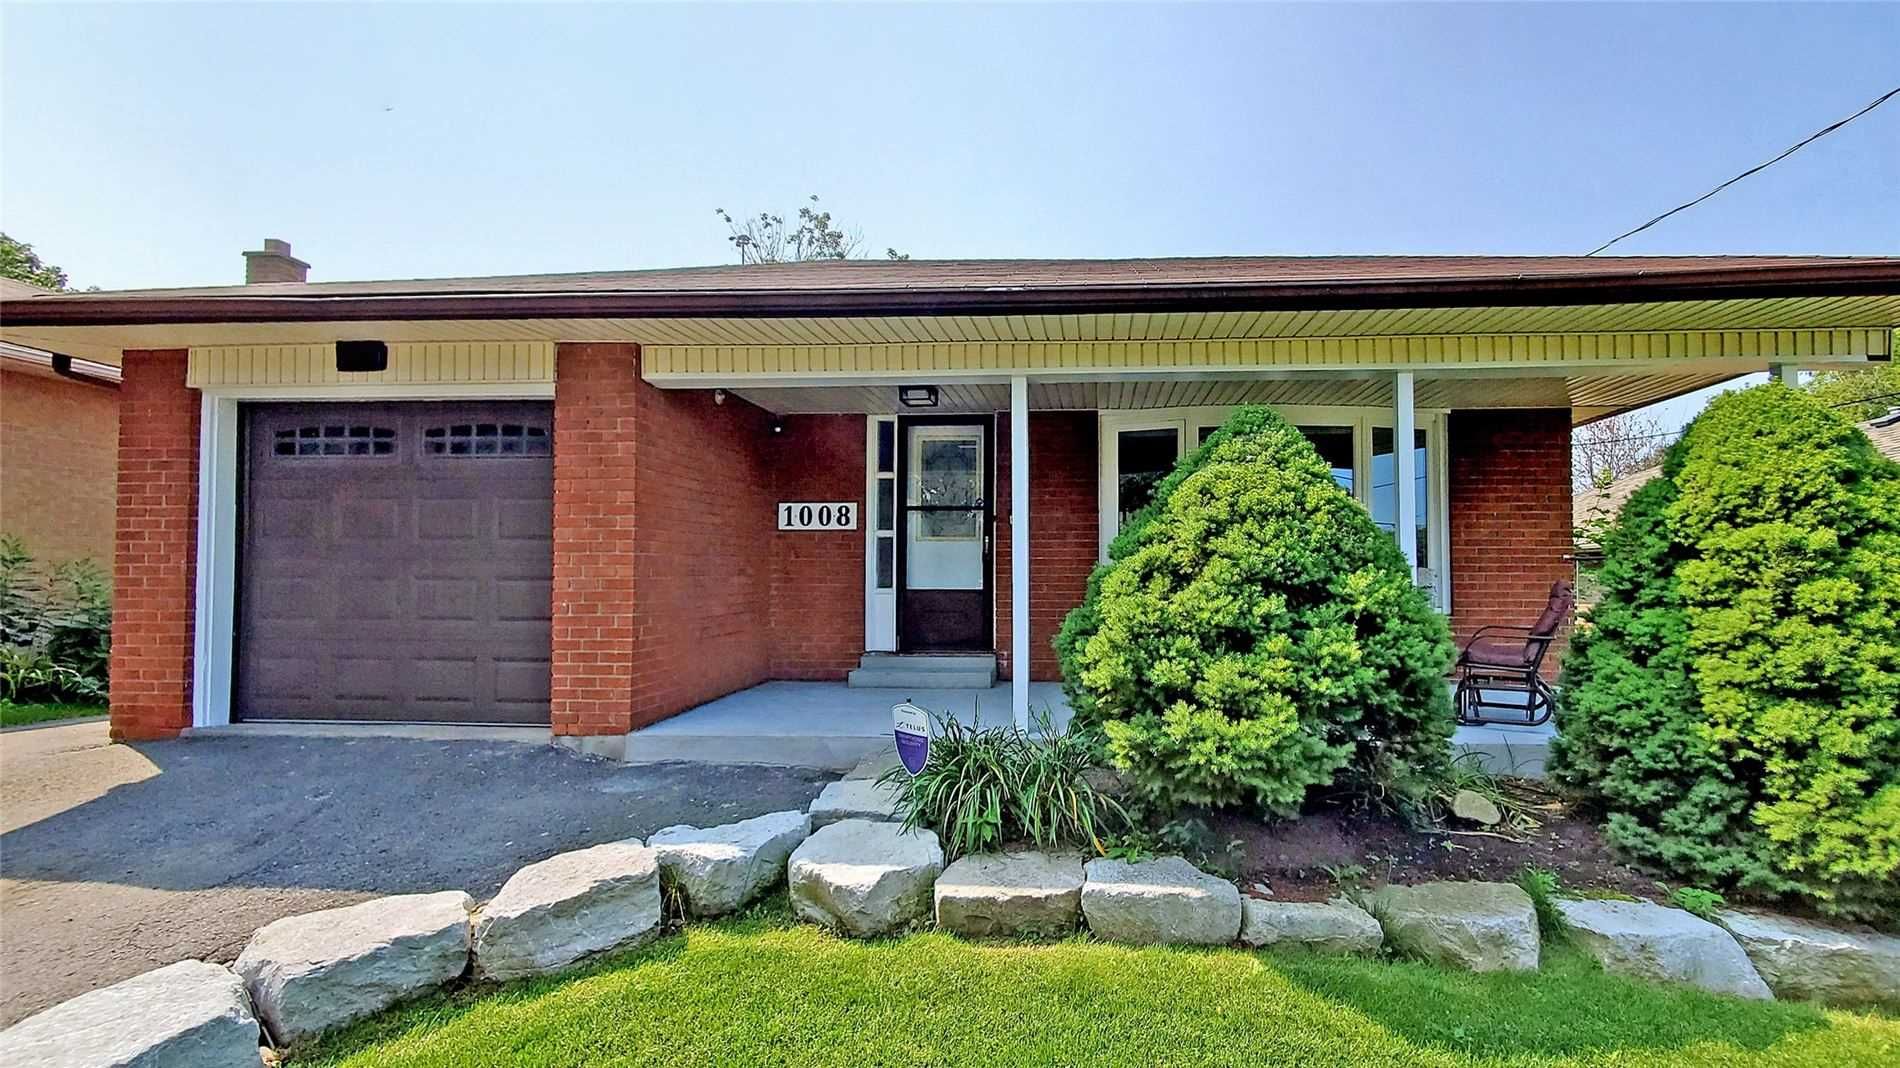 Main Photo: 1008 Mccullough Drive in Whitby: Downtown Whitby House (Bungalow) for sale : MLS®# E5334842